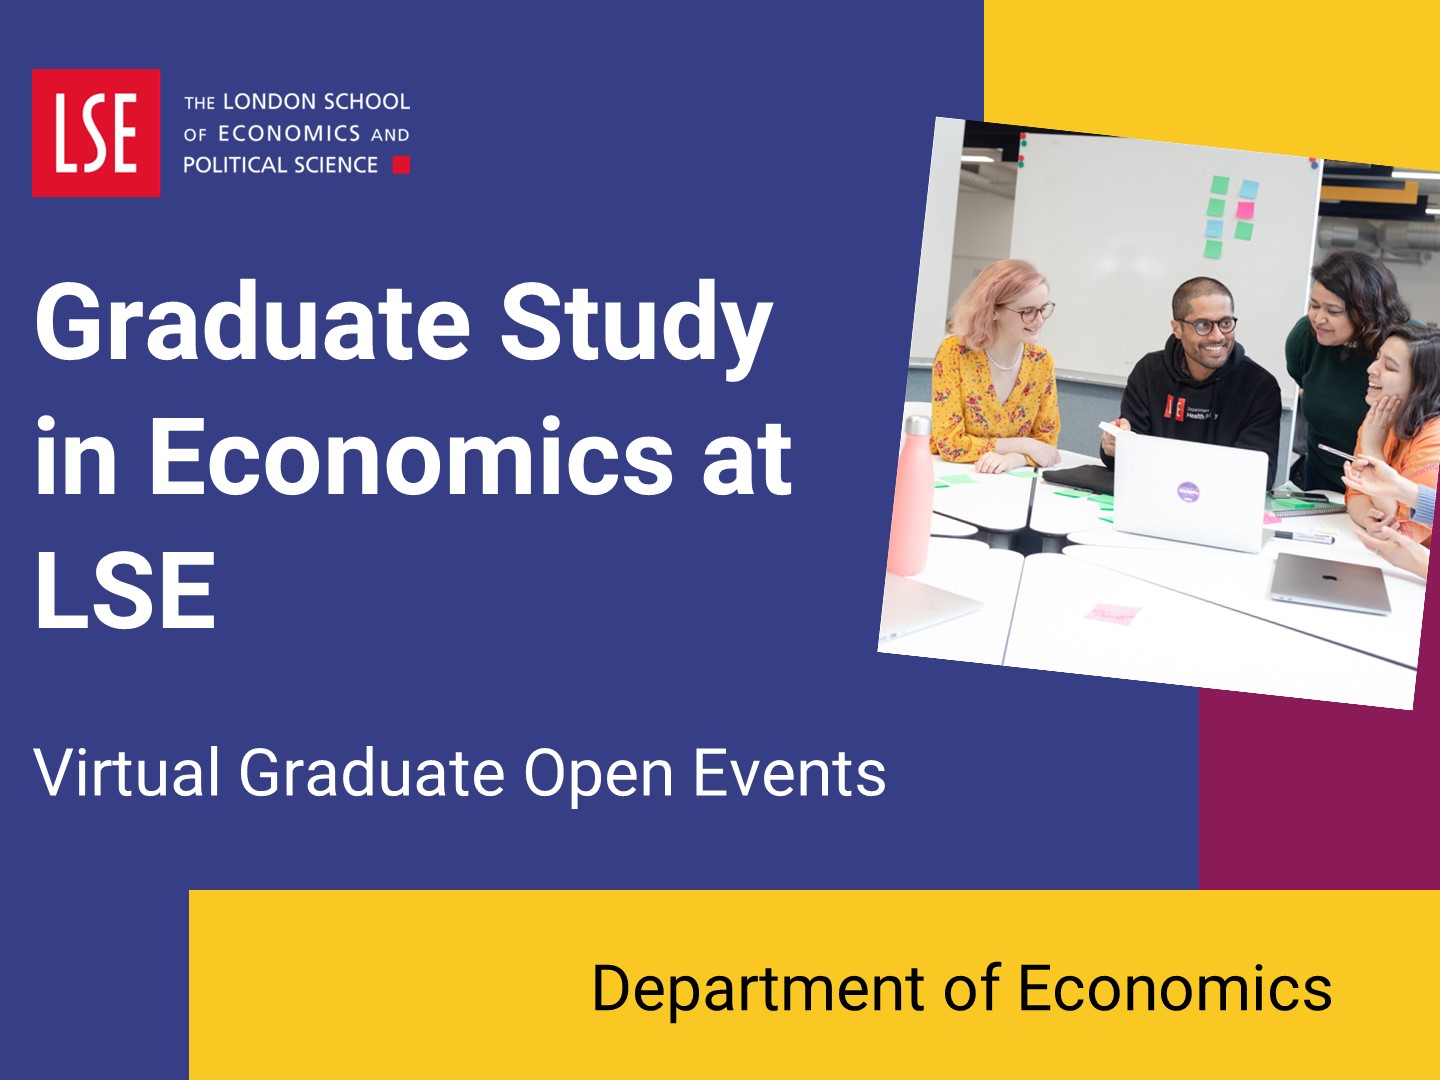 An introduction to graduate study in Economics at LSE